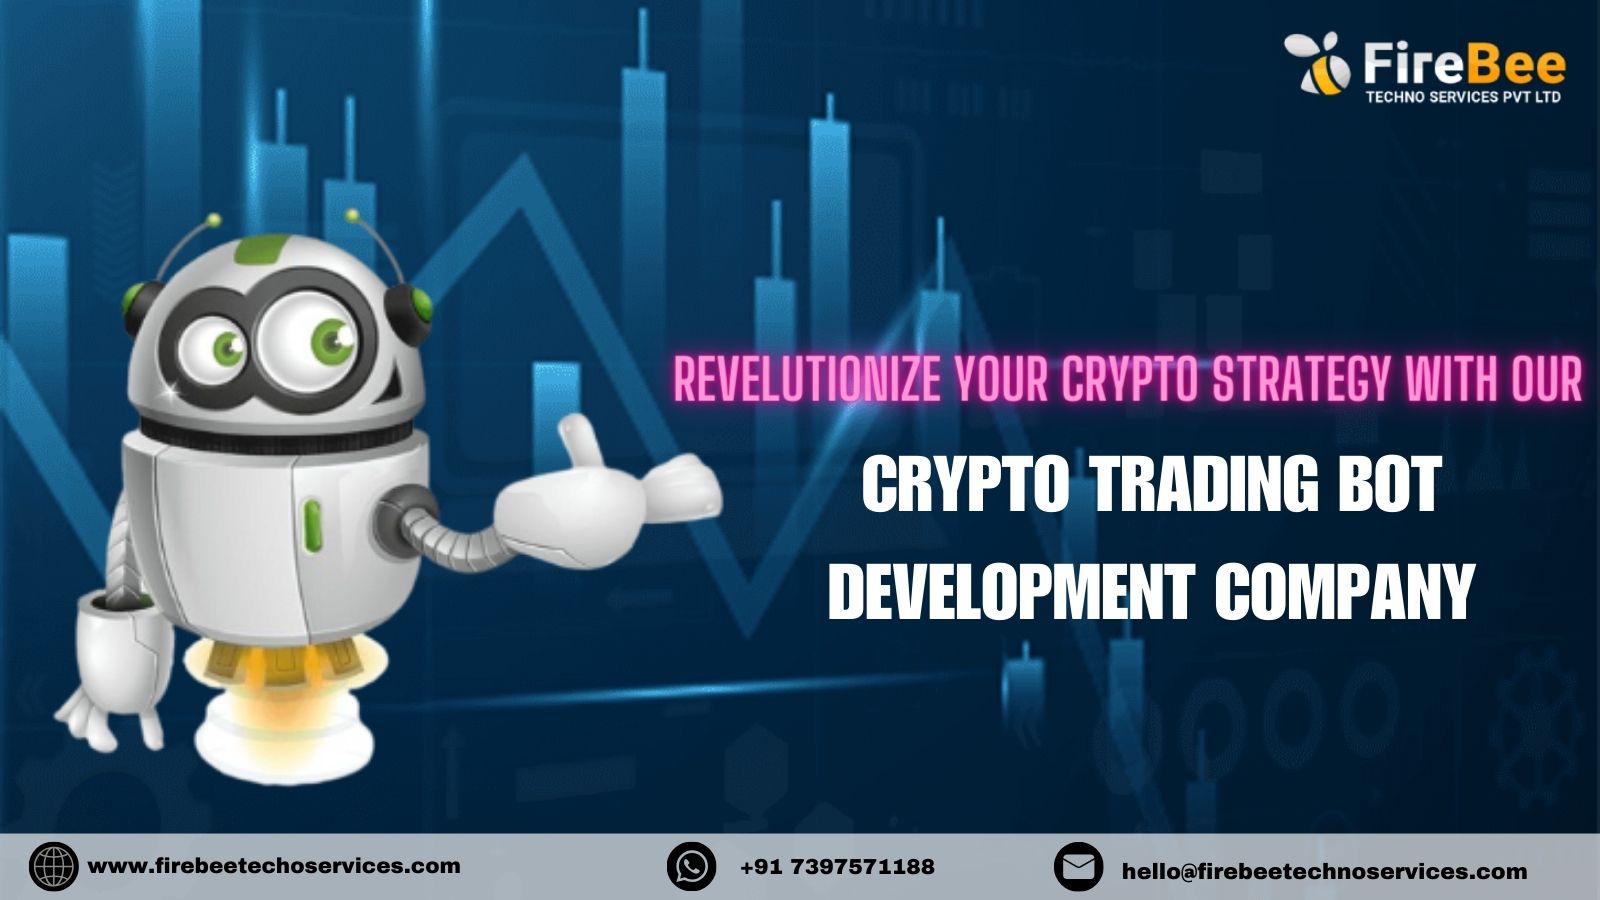 What are the Business advantages included in AI Crypto trading bot development?